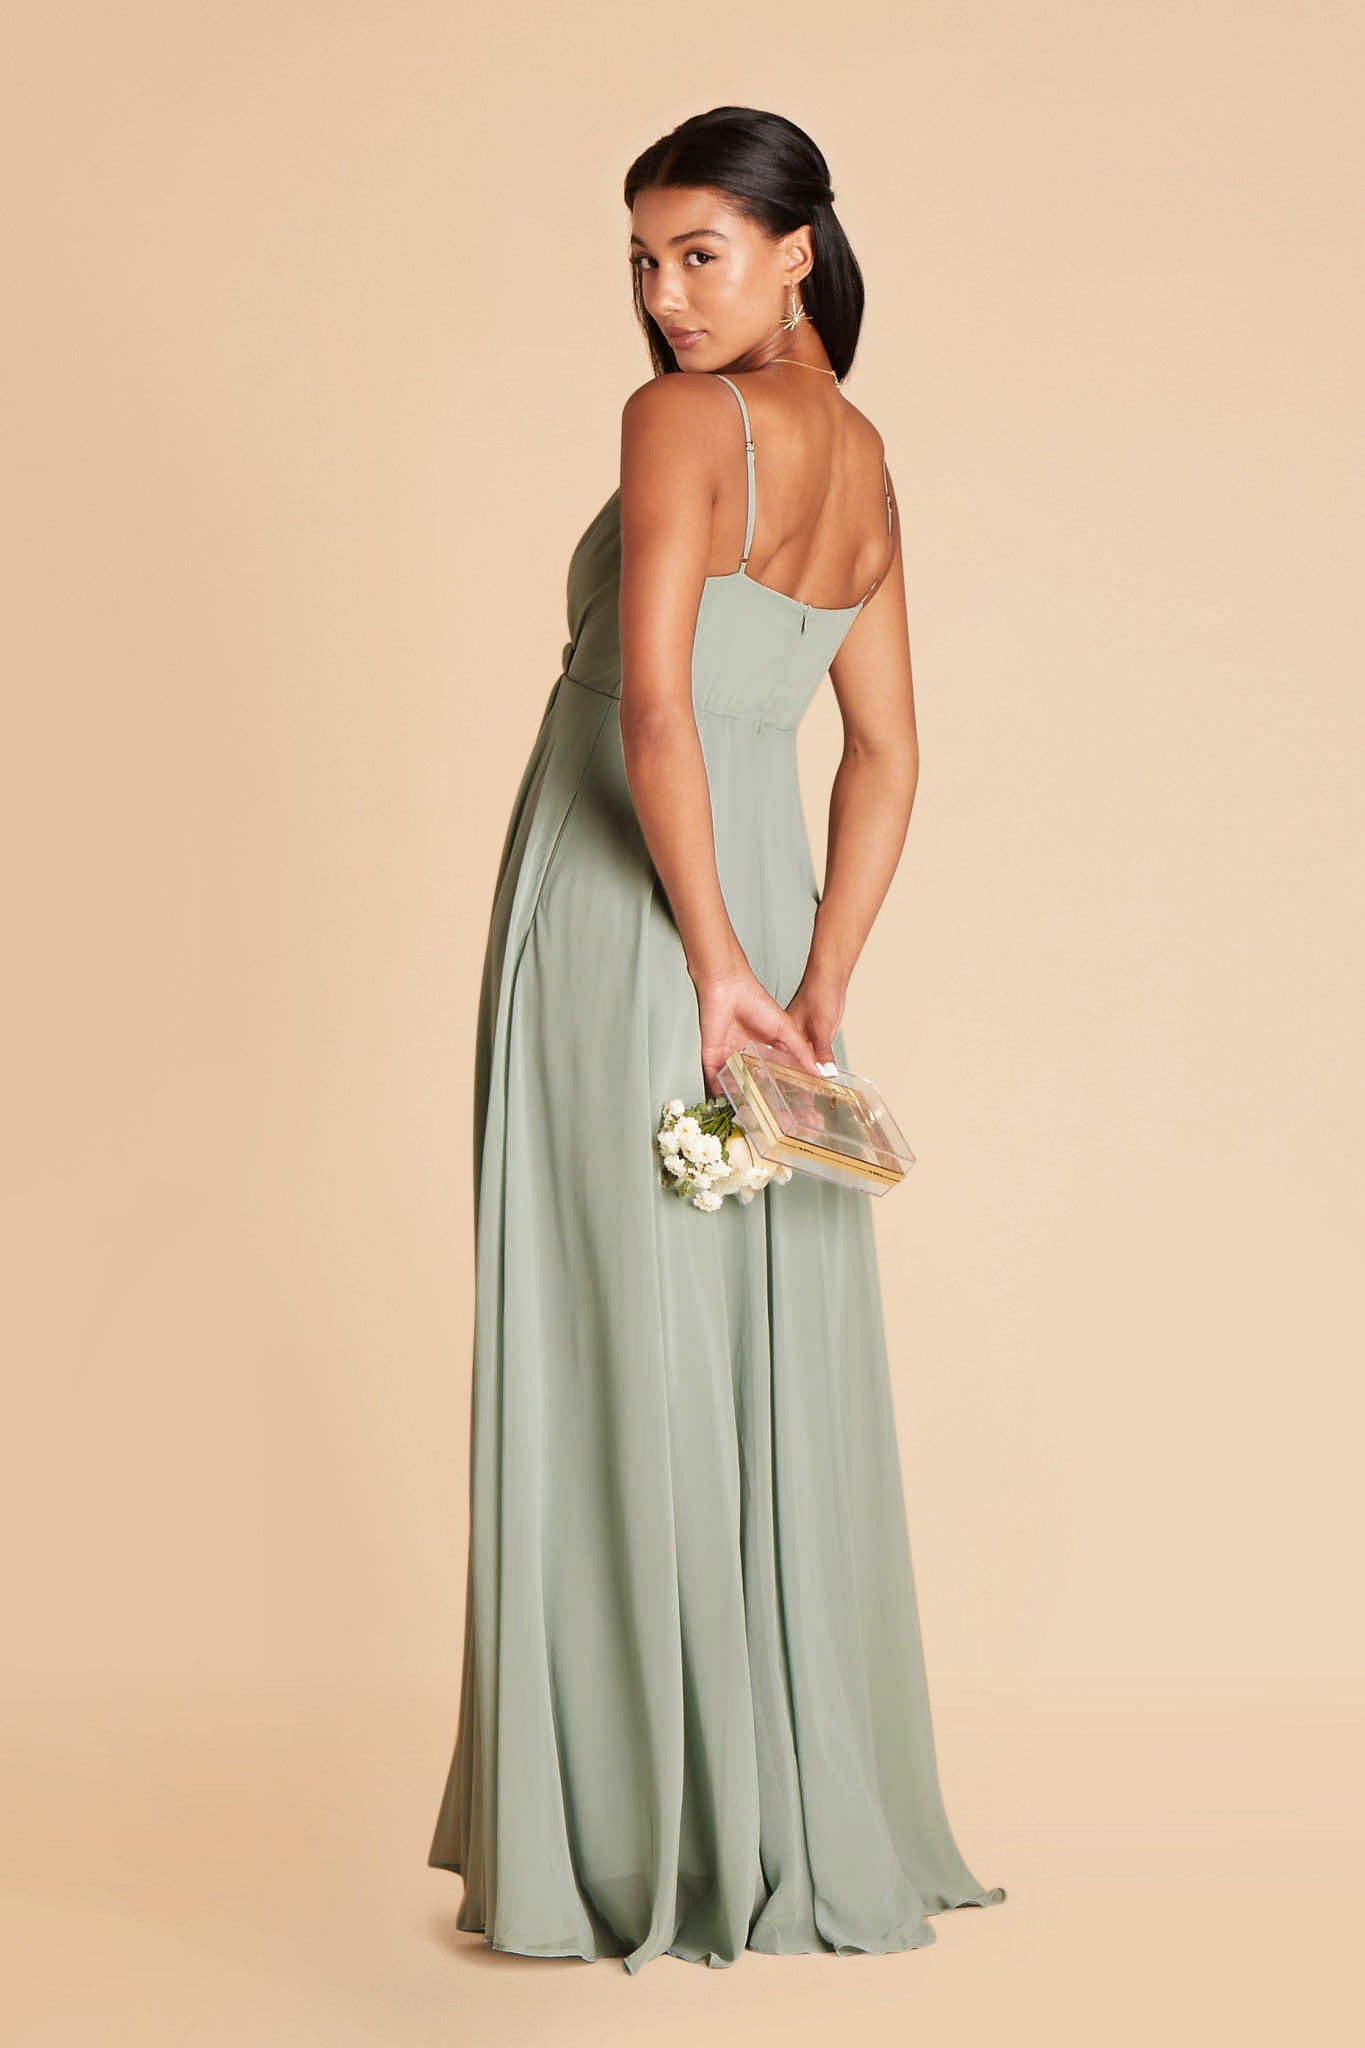 Side and back view of the Kaia Dress in sage chiffon shows a hidden side pocket, adjustable straps, and bodice back with a full length skirt gently gathered at the waist back and flowing to the floor.